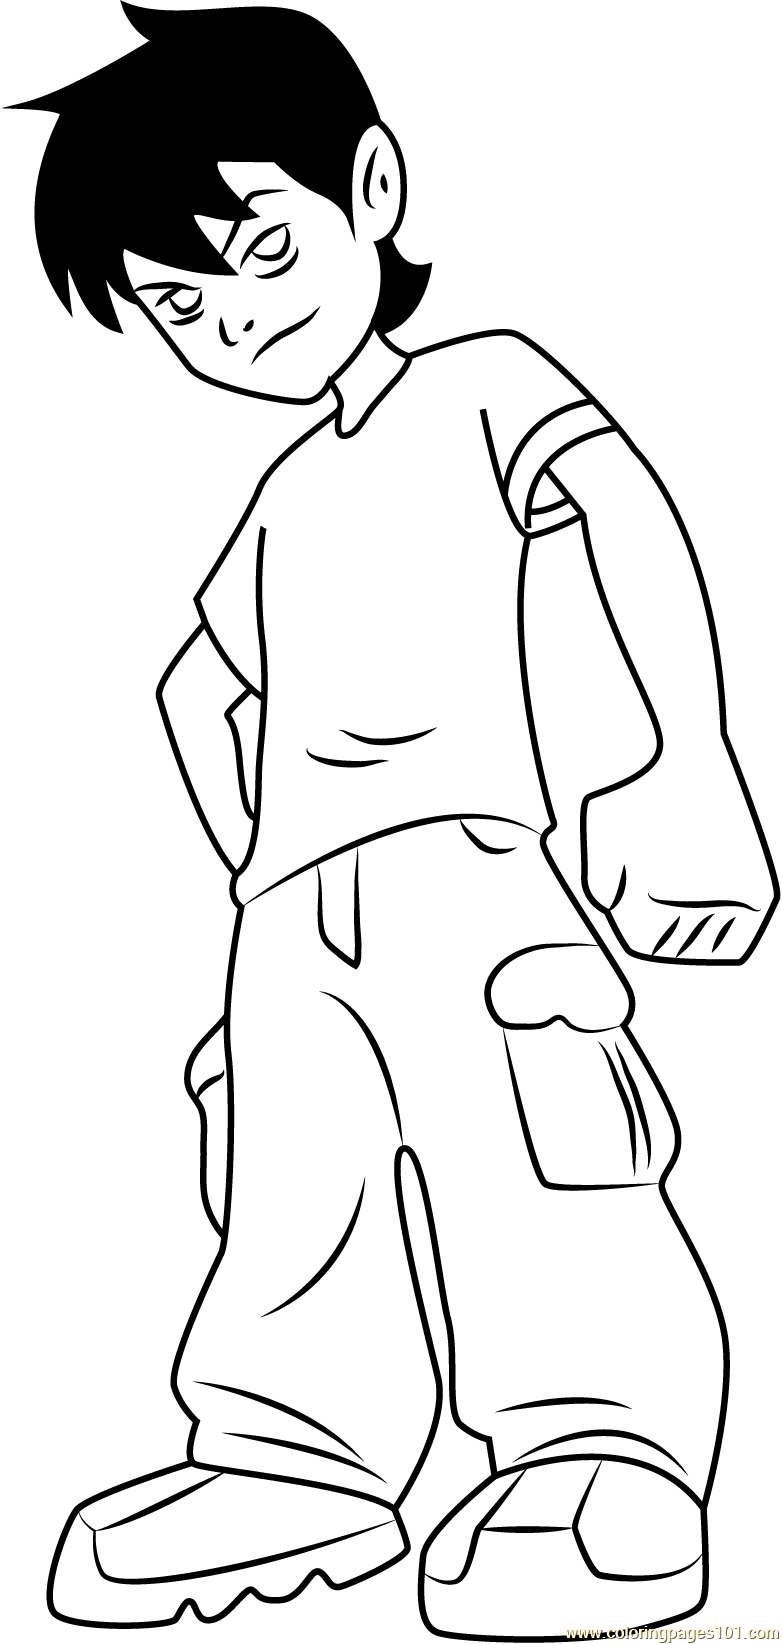 Angry Ben Coloring Page for Kids - Free Ben 10 Printable Coloring Pages